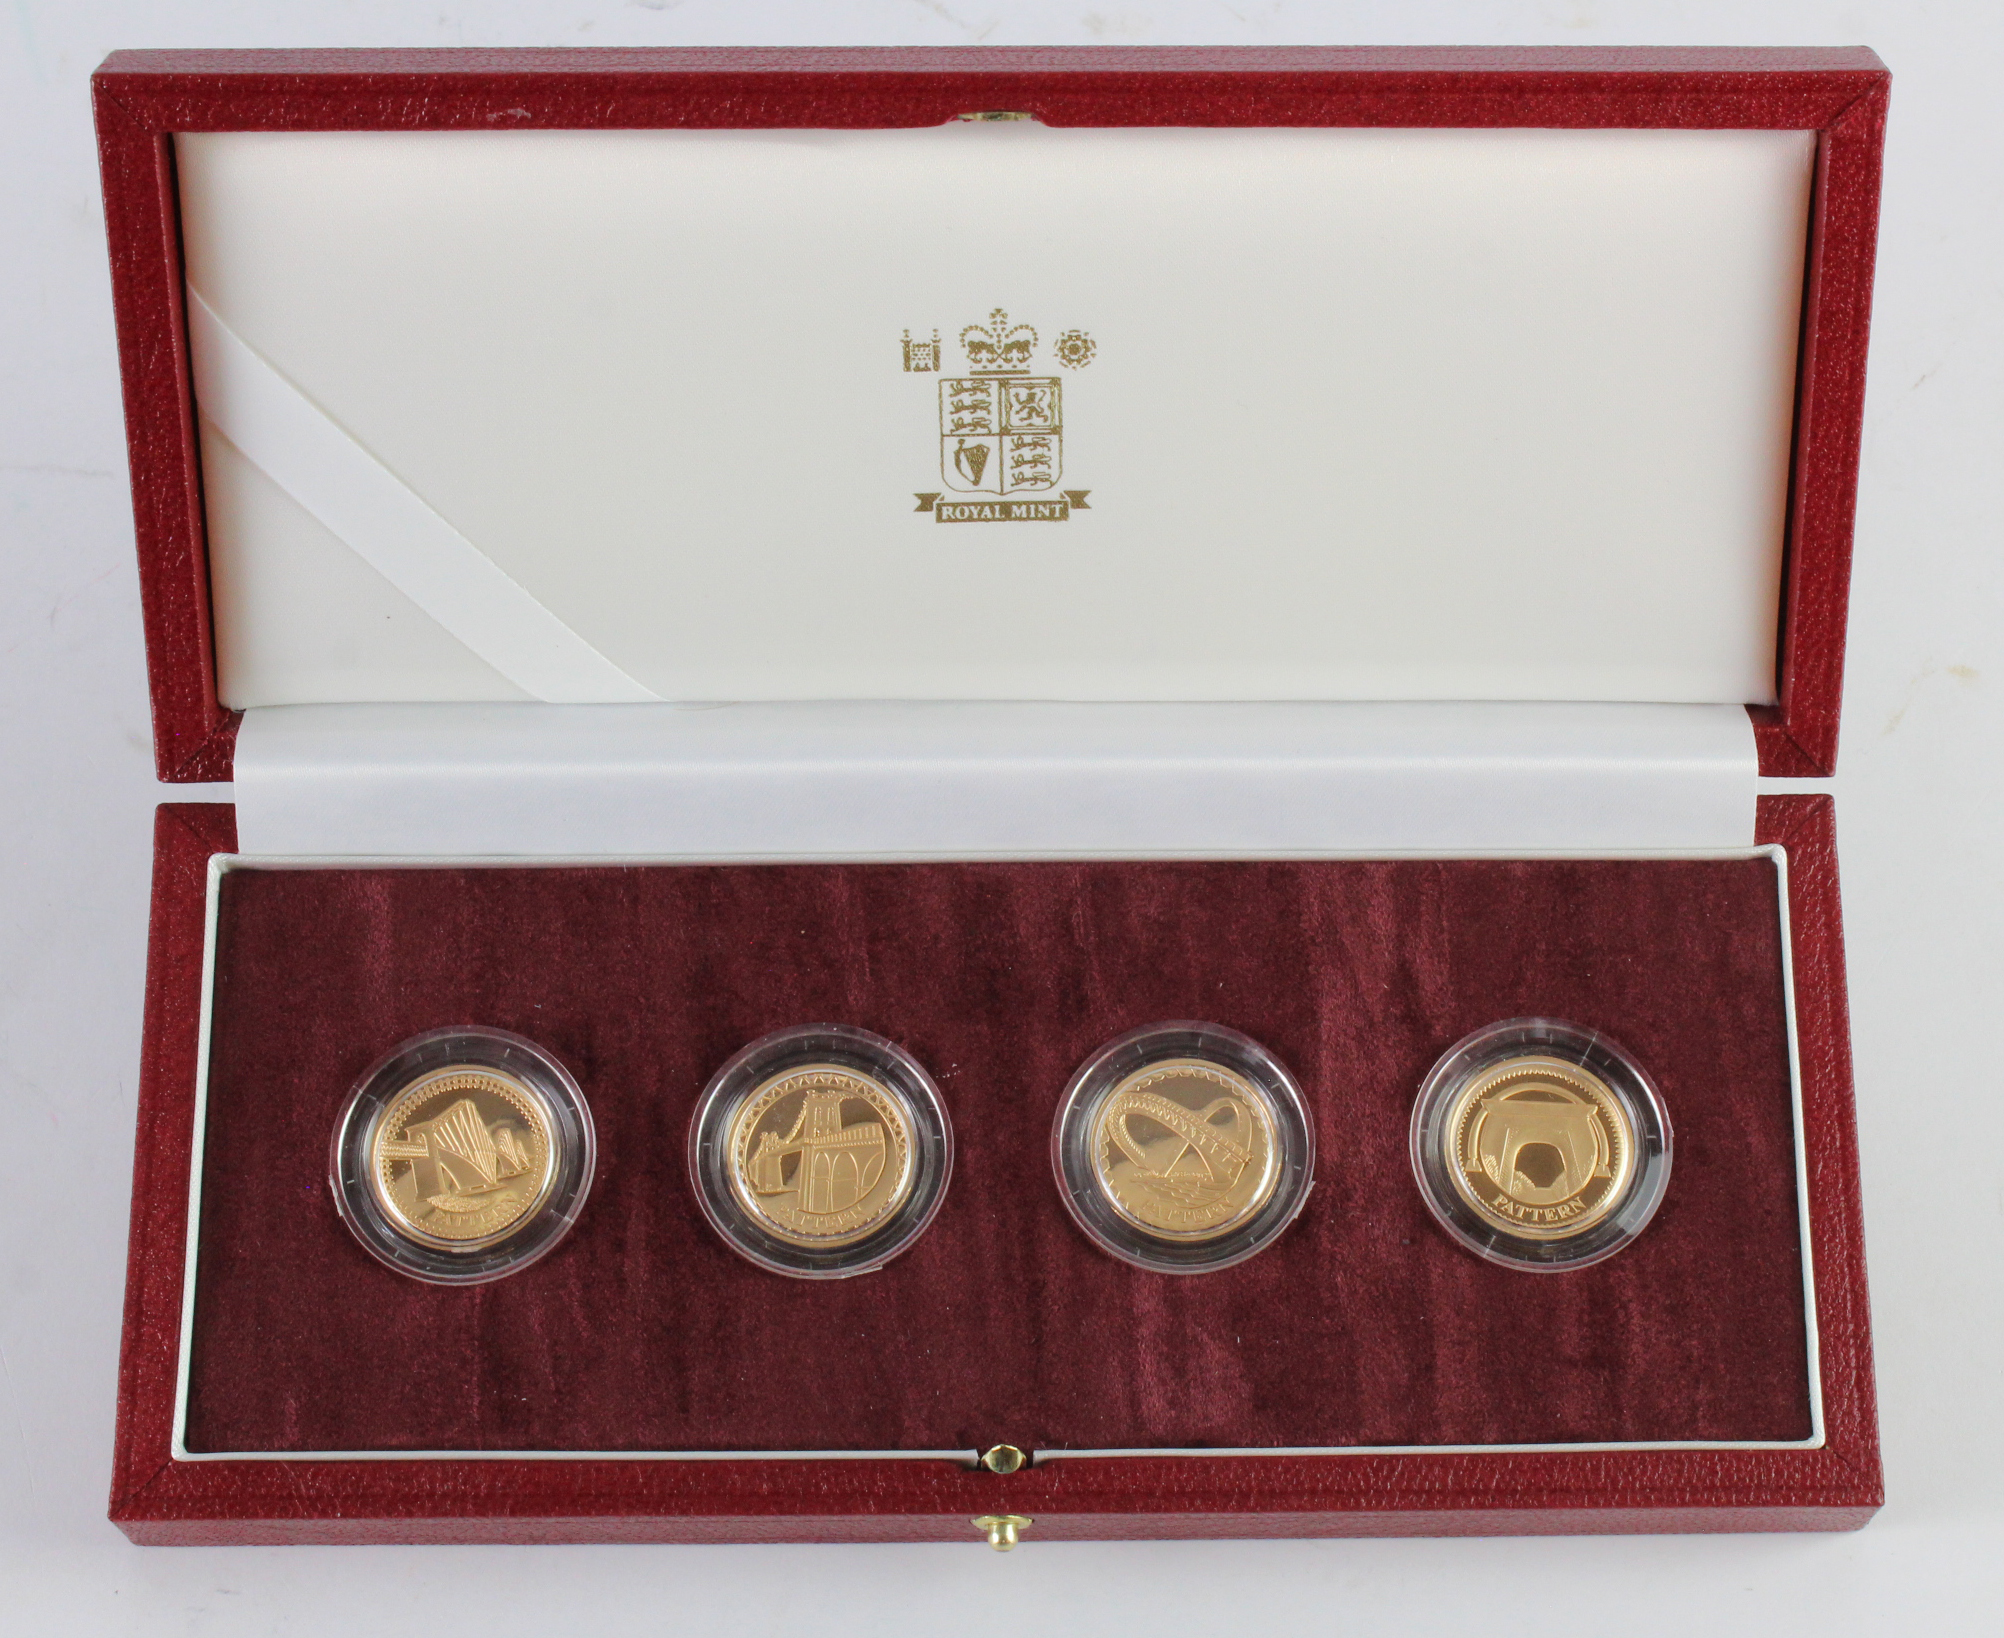 Royal Mint: United Kingdom Pattern Collection: Bridge £1 four-coin set (gold proof) 2003, FDC